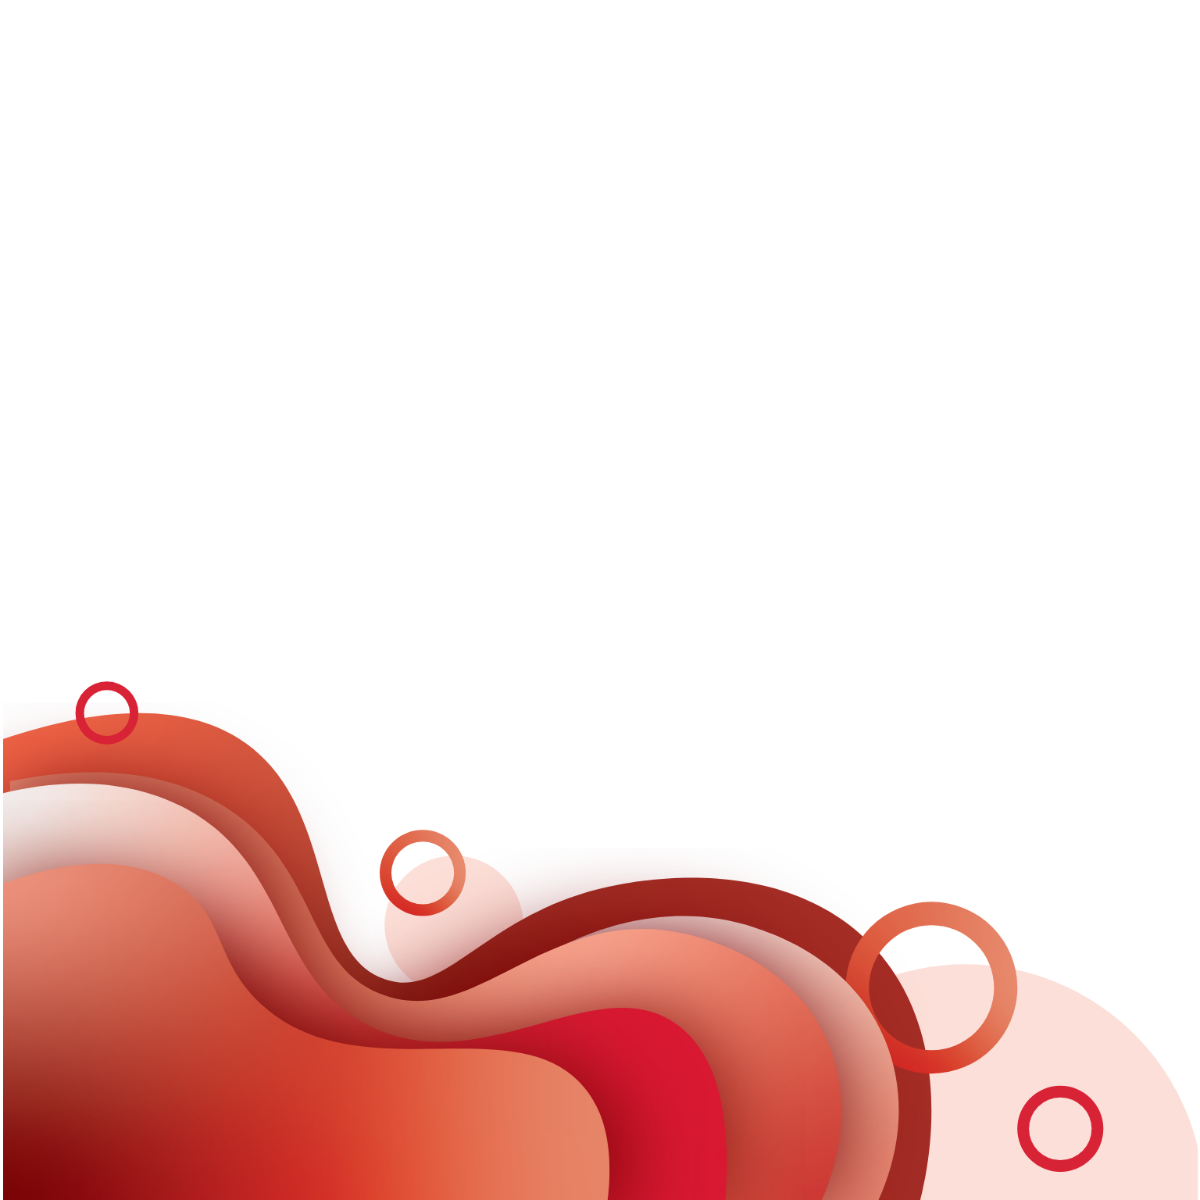 Abstract Red Overlay